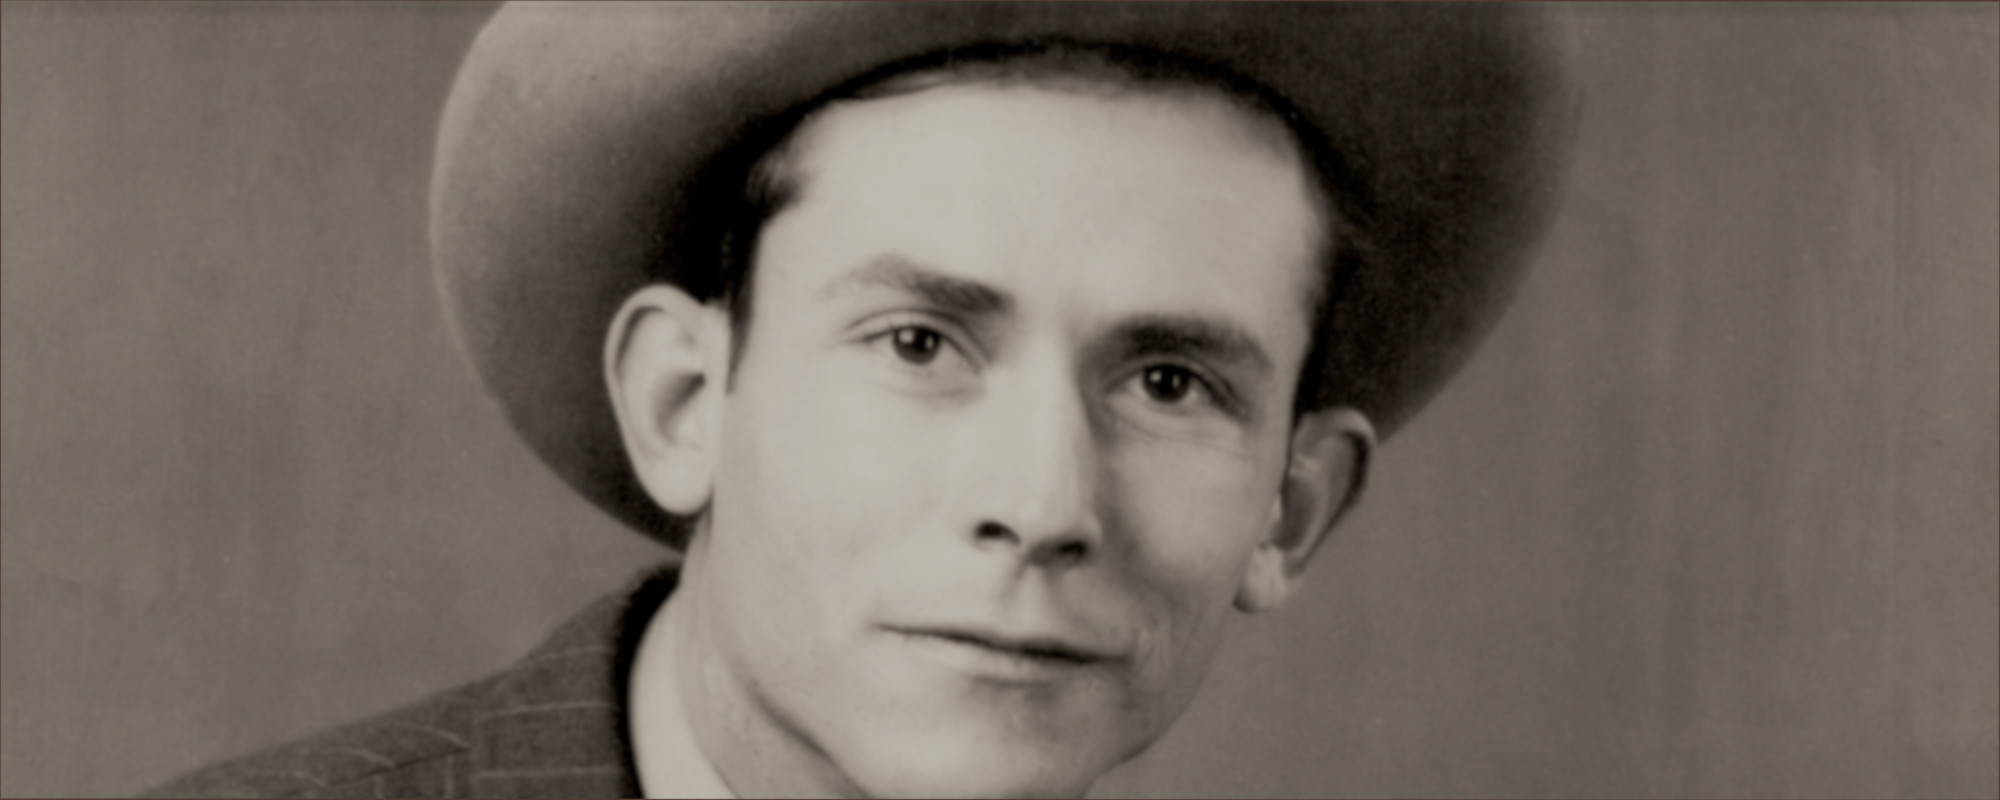 5 Songs You Didn’t Know Hank Williams Wrote for Other Artists